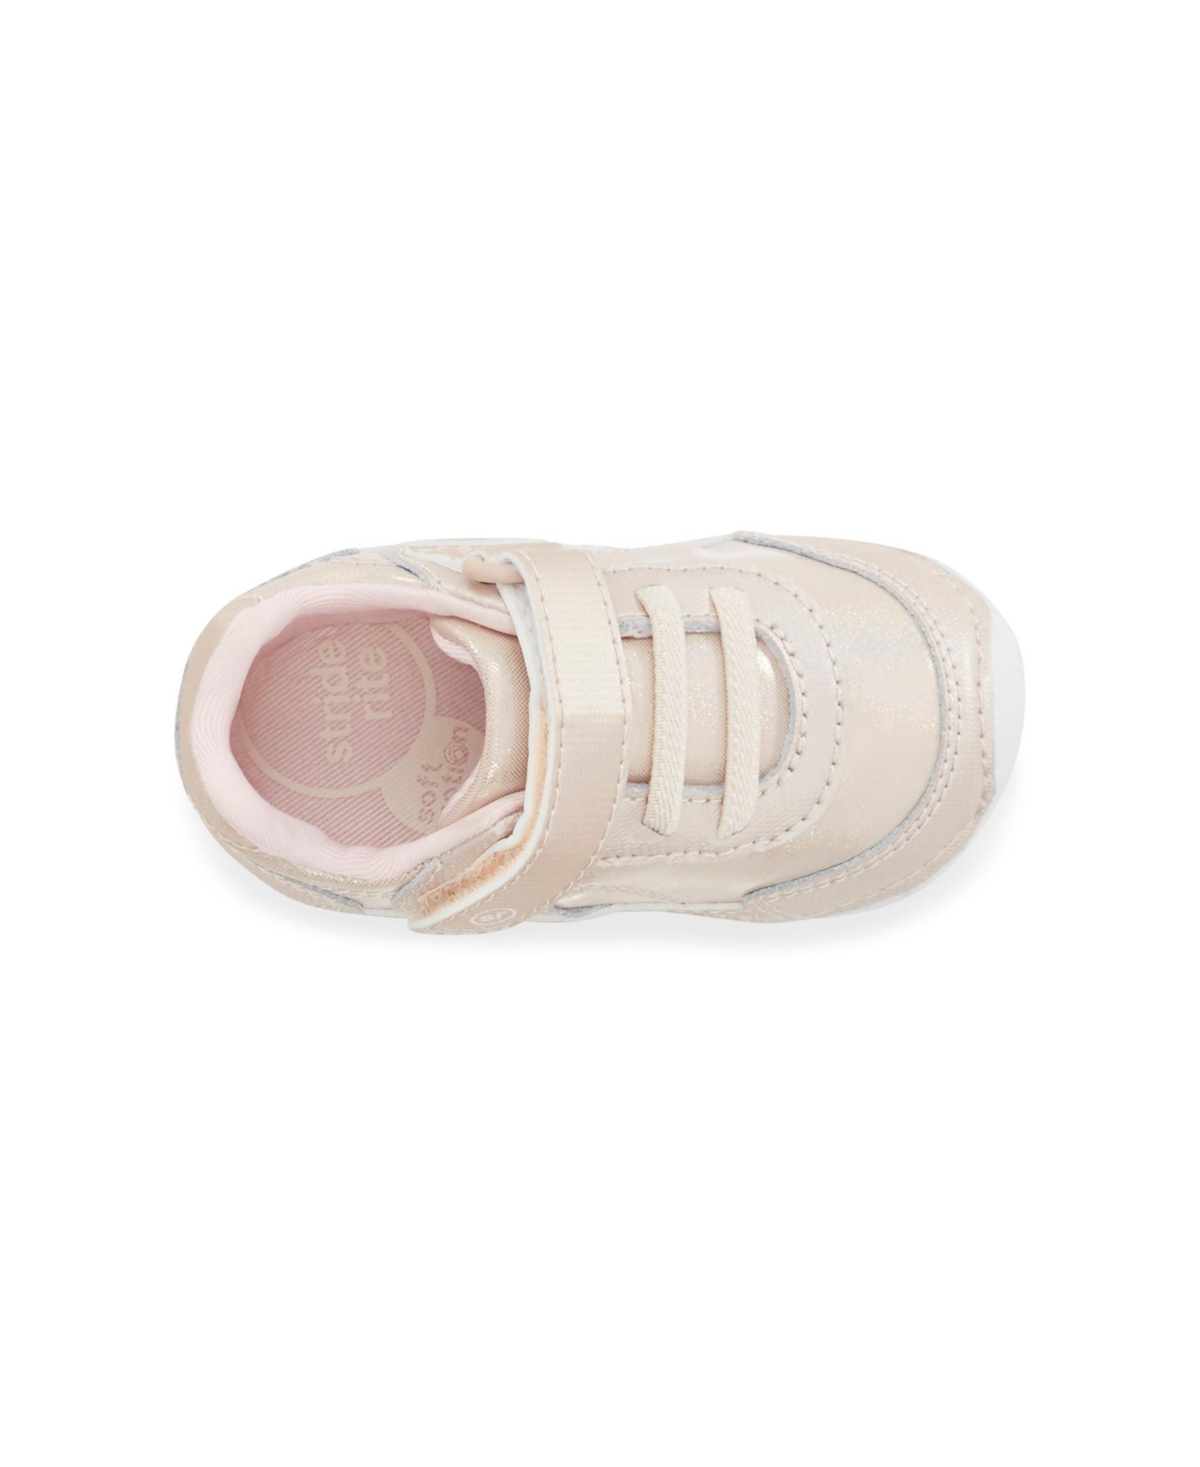 Shop Stride Rite Little Boys Sm Grover Apma Approved Shoe In Champagne